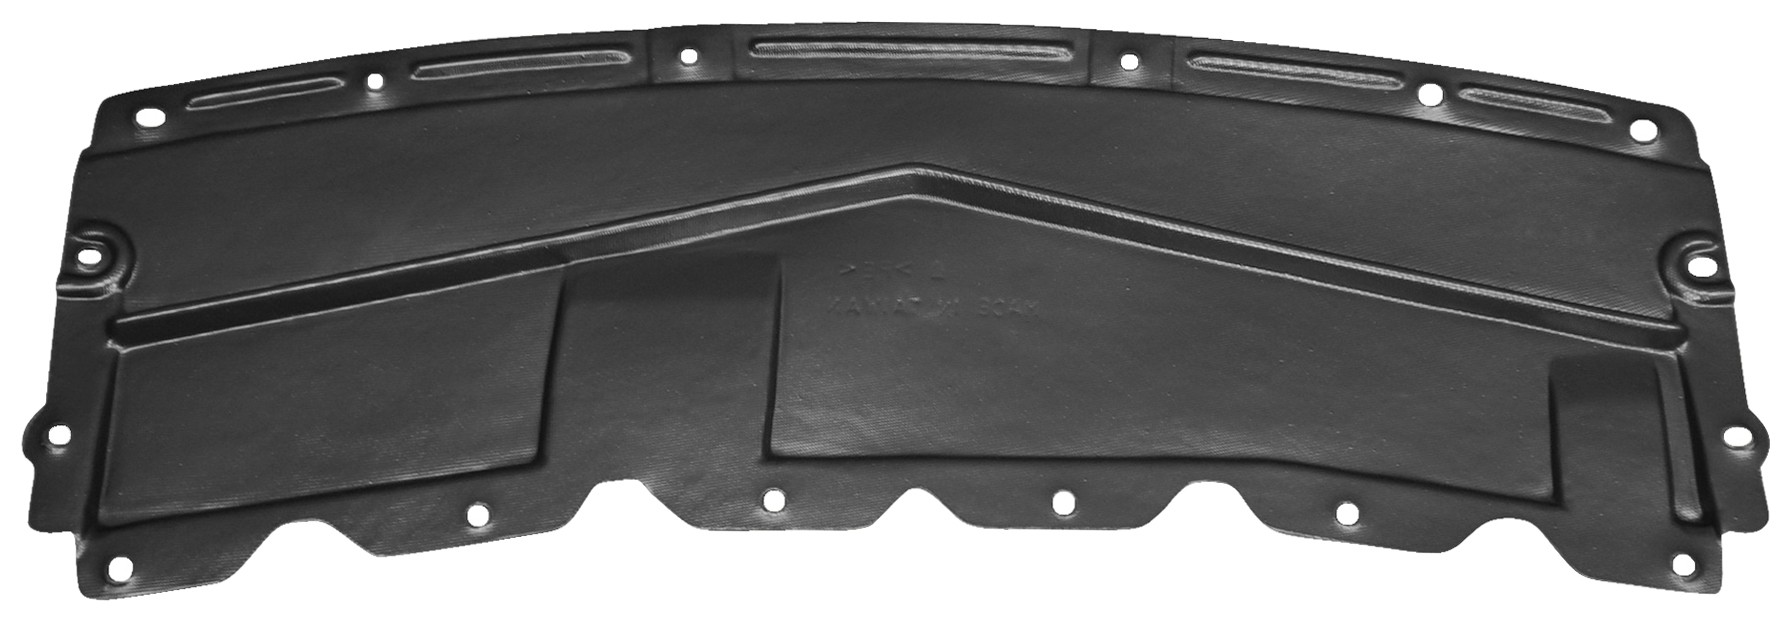 Aftermarket UNDER ENGINE COVERS for NISSAN - VERSA, VERSA,15-19,Lower engine cover